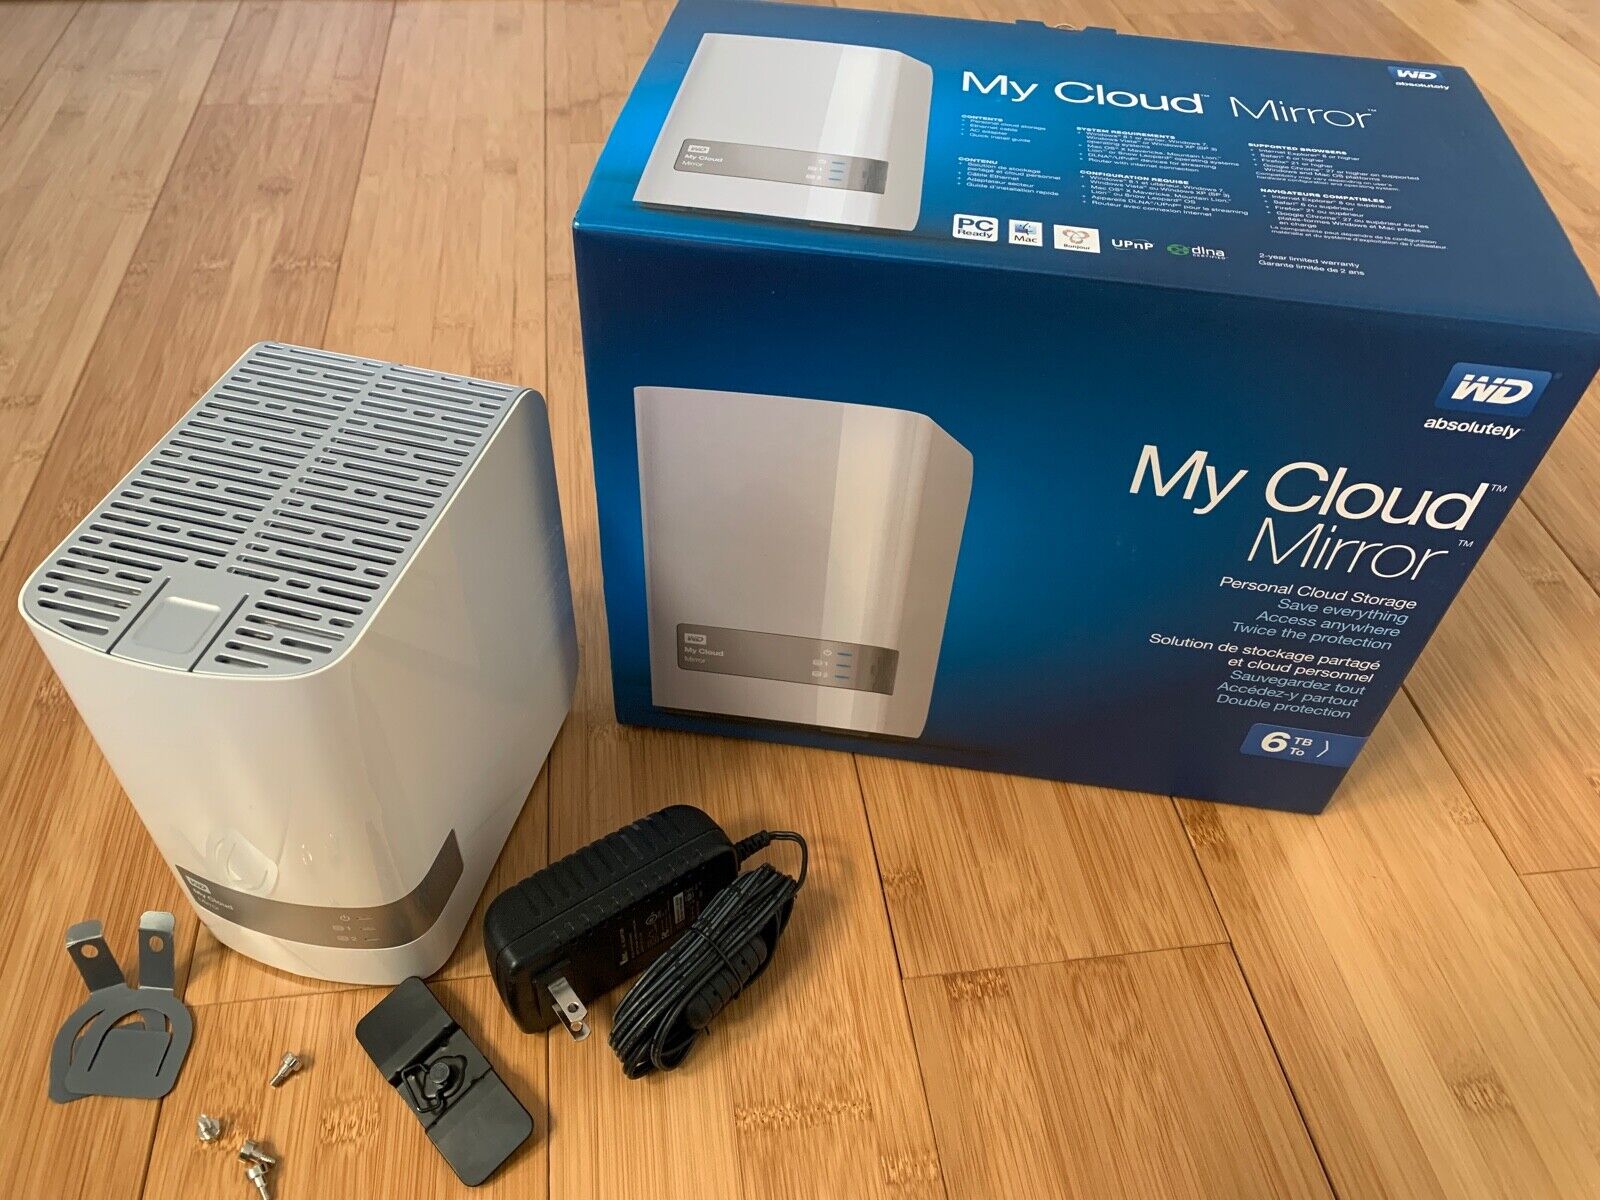 WD My Cloud Mirror 1st Gen - NO DISC - very clean with box